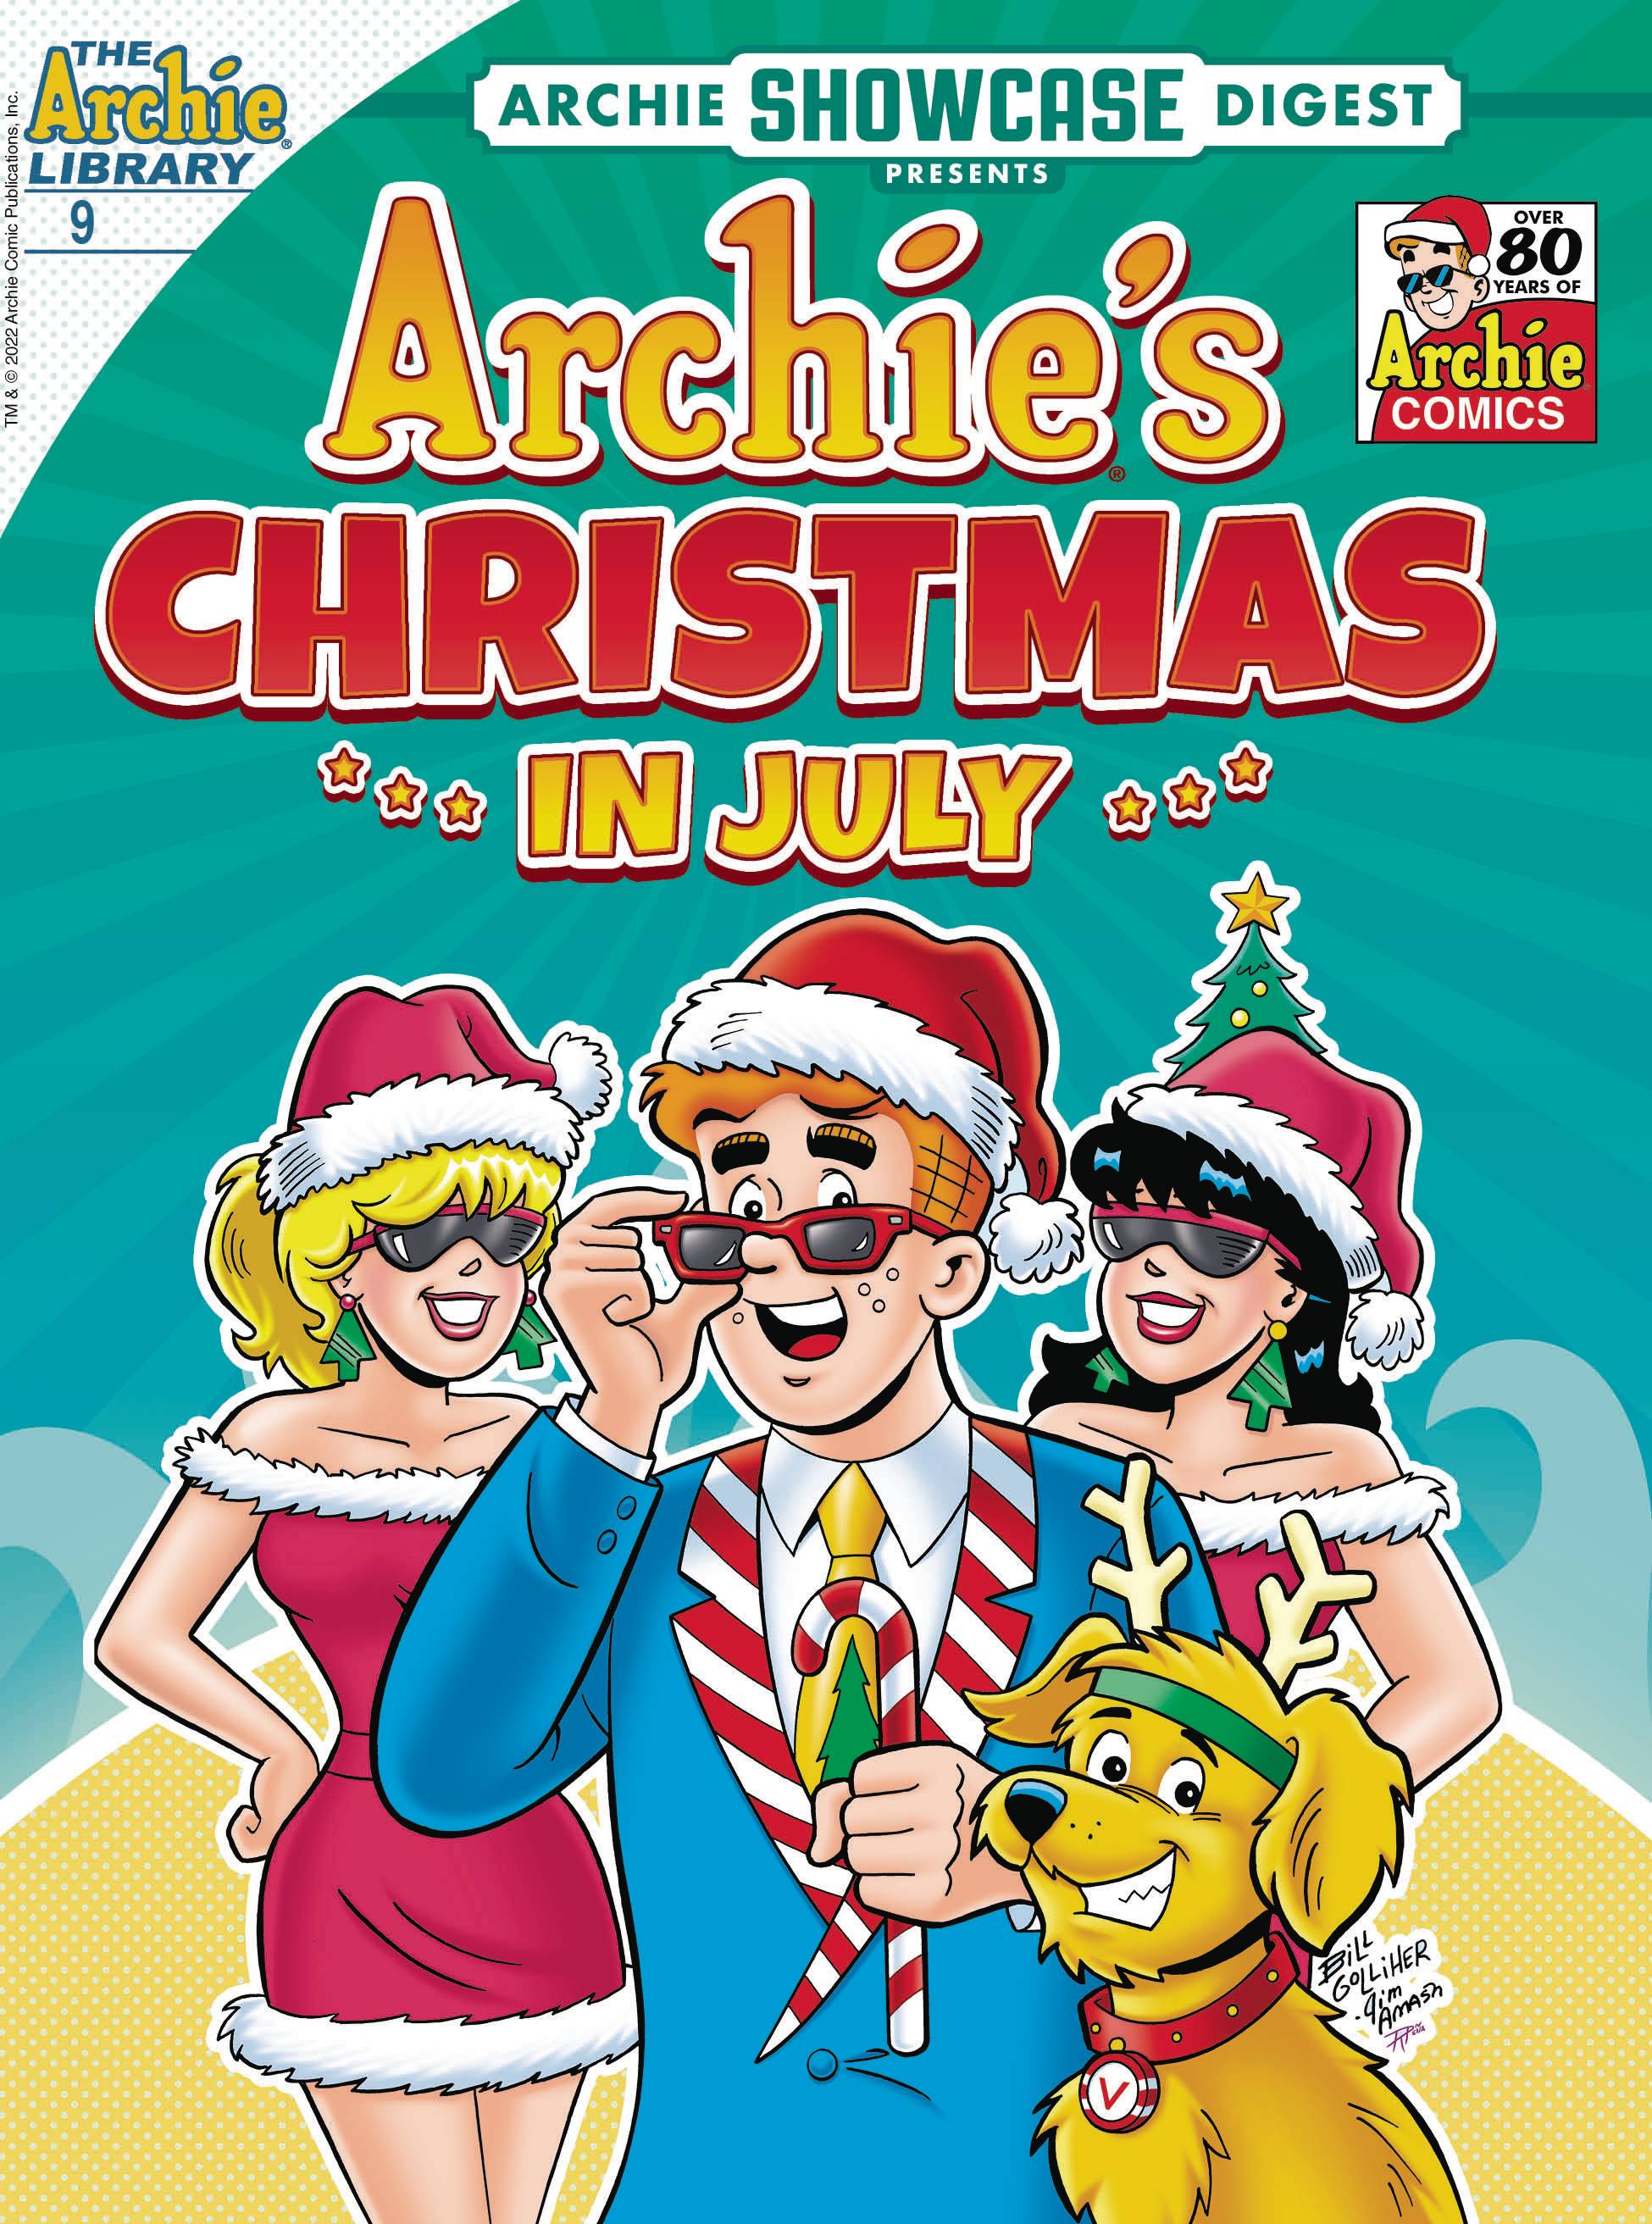 ARCHIE SHOWCASE DIGEST #9 CHRISTMAS IN JULY